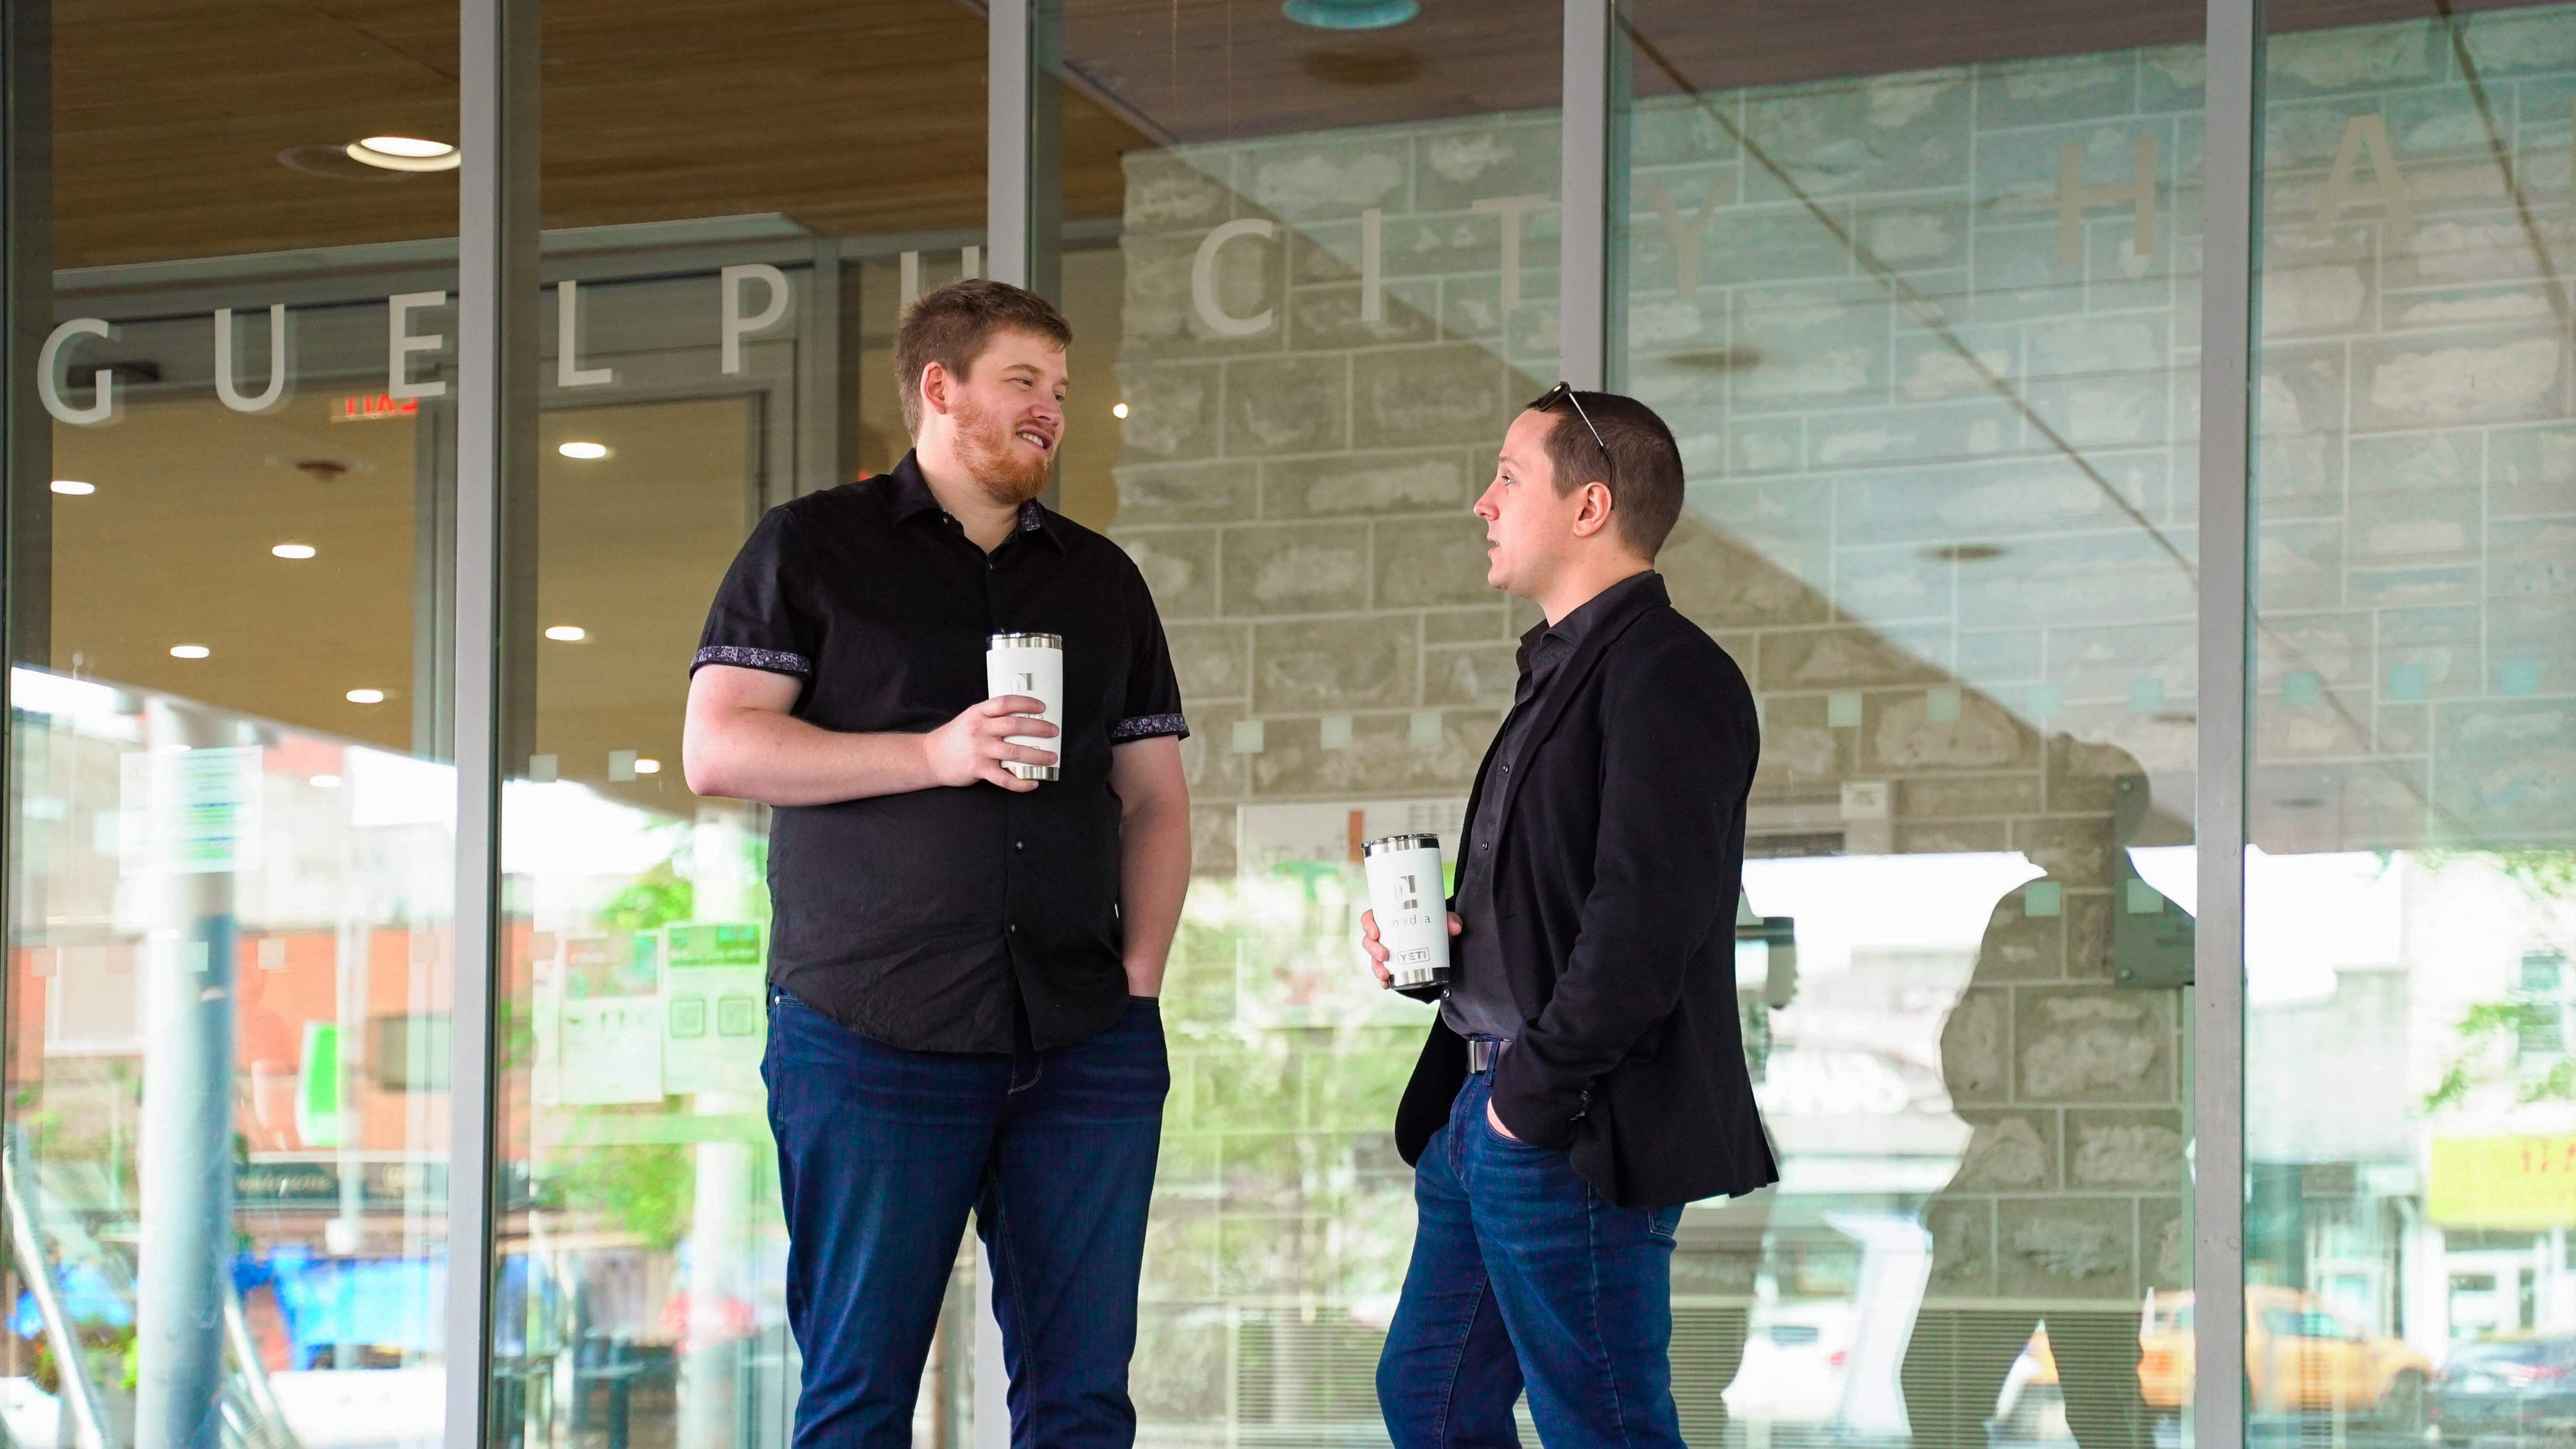 Two men stand outside talking about their delight in God while drinking coffee.